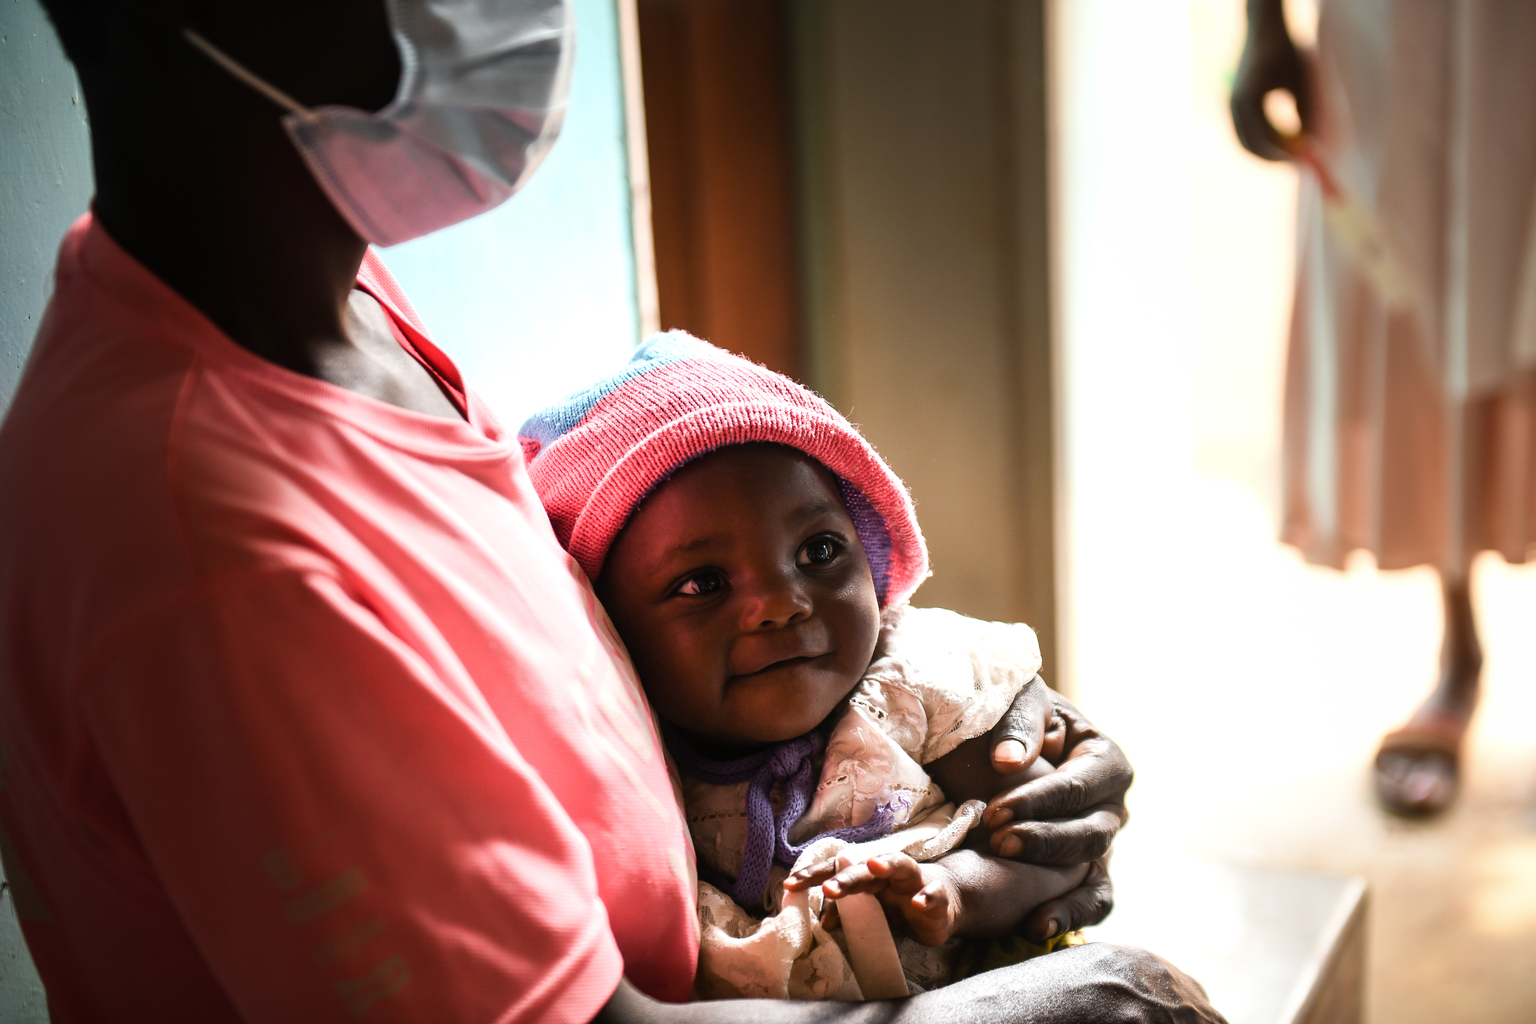 A mother wearing a mask to protect against COVID-19 holds her baby at a health clinic in Malawi